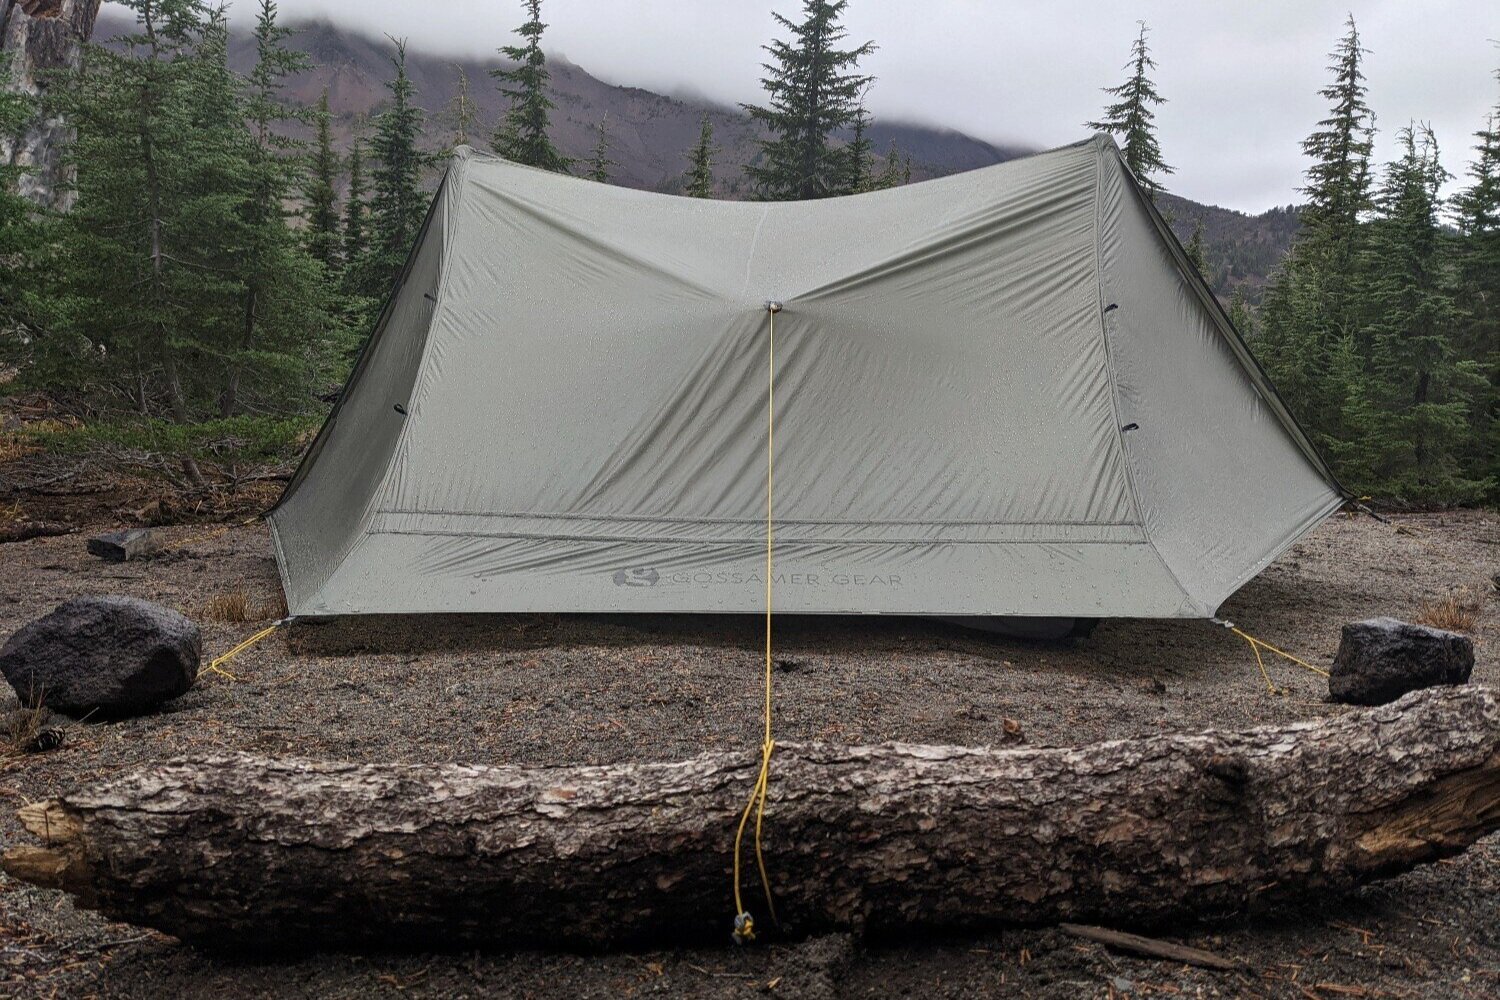 Non-freestanding tents, like the Gossamer Gear The Two, use trekking poles and guylines for a full pitch.